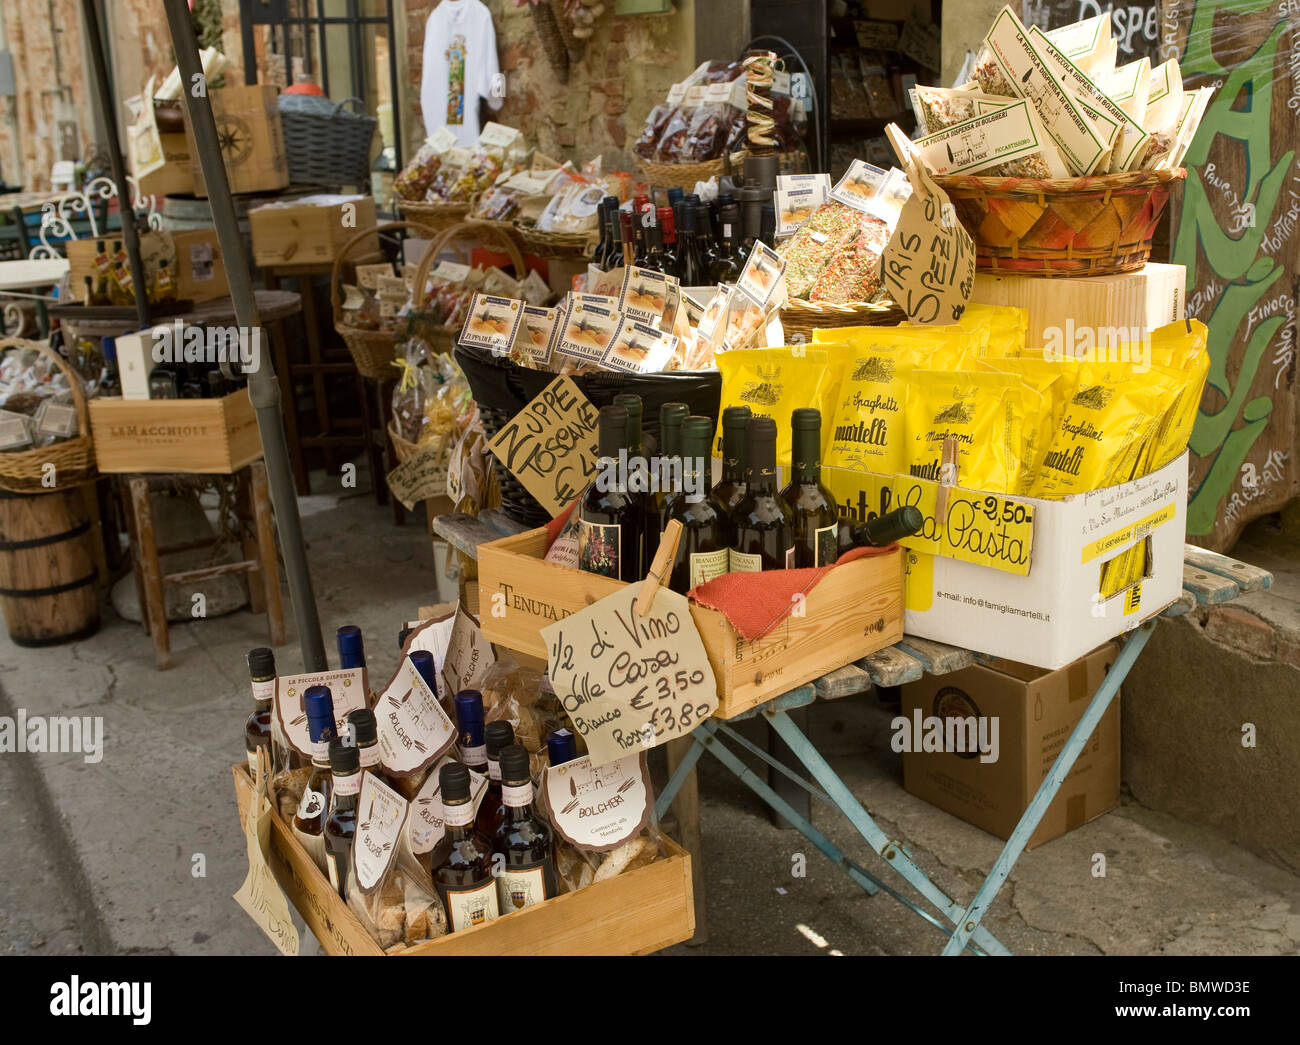 Products displayed outside a Tuscan Grocers Shop Stock Photo